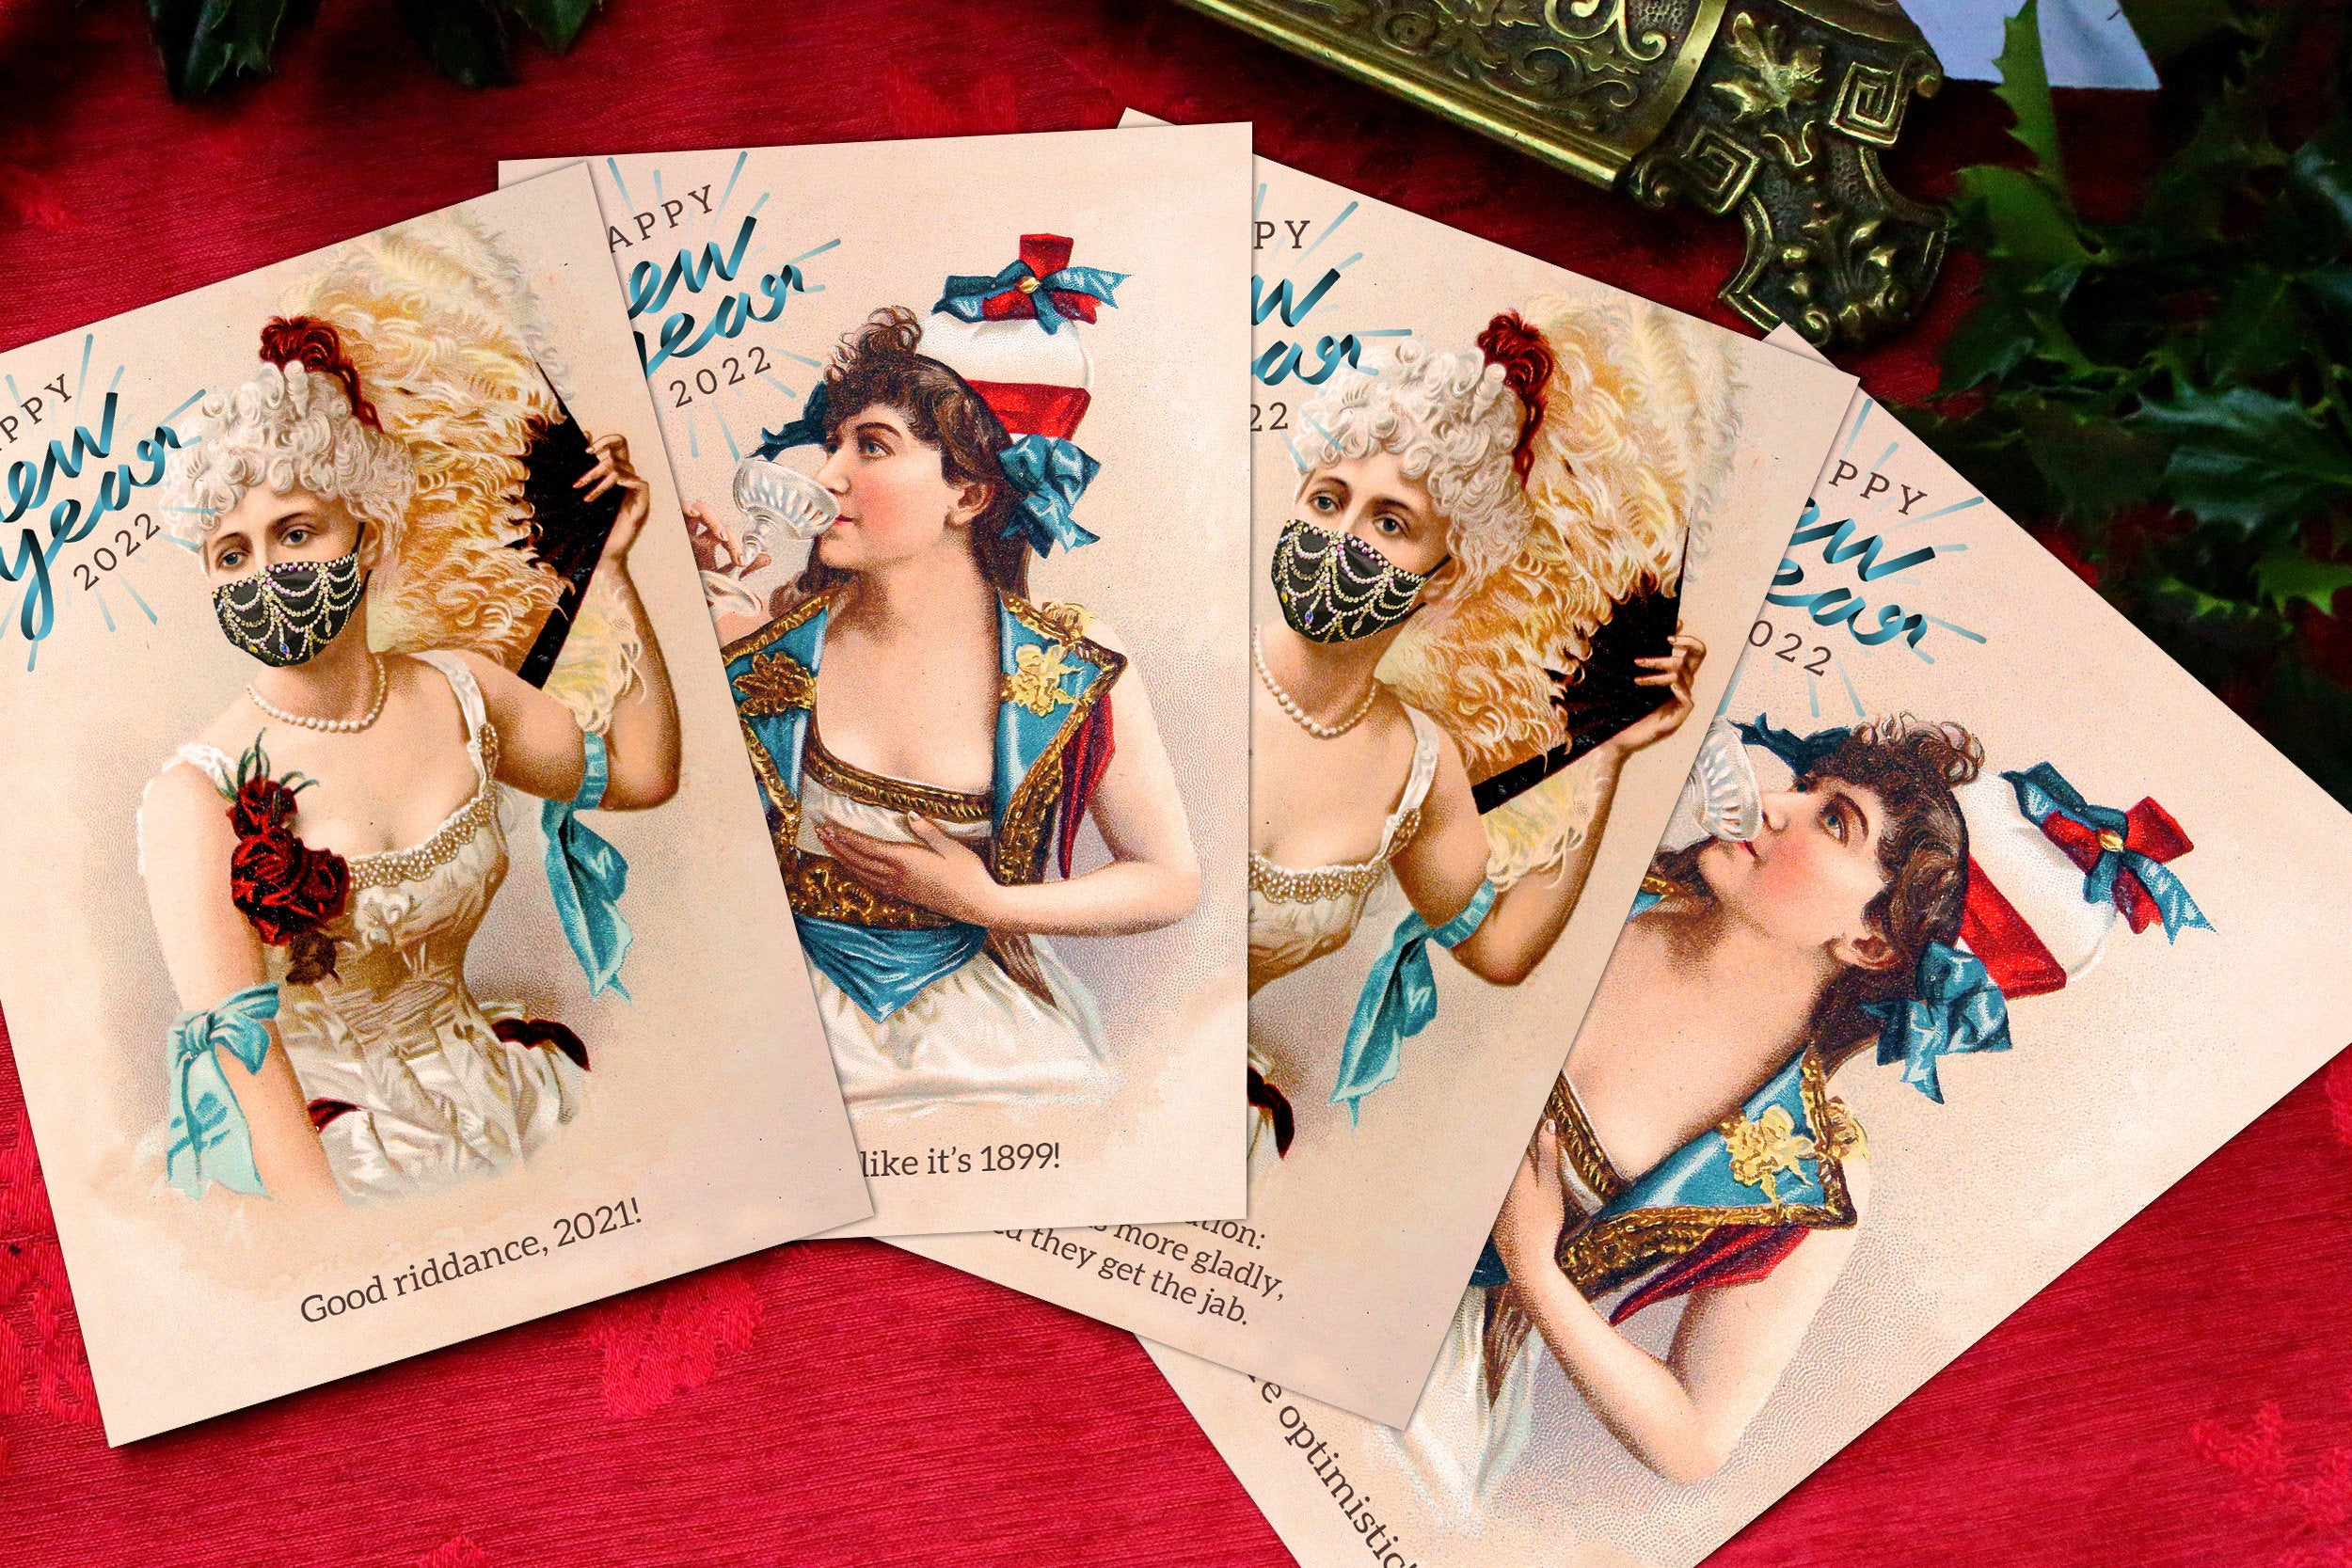 Masked Victorian Debutantes, New Year 2022, Funny Pandemic Postcards, 6 Designs, 12 Cards